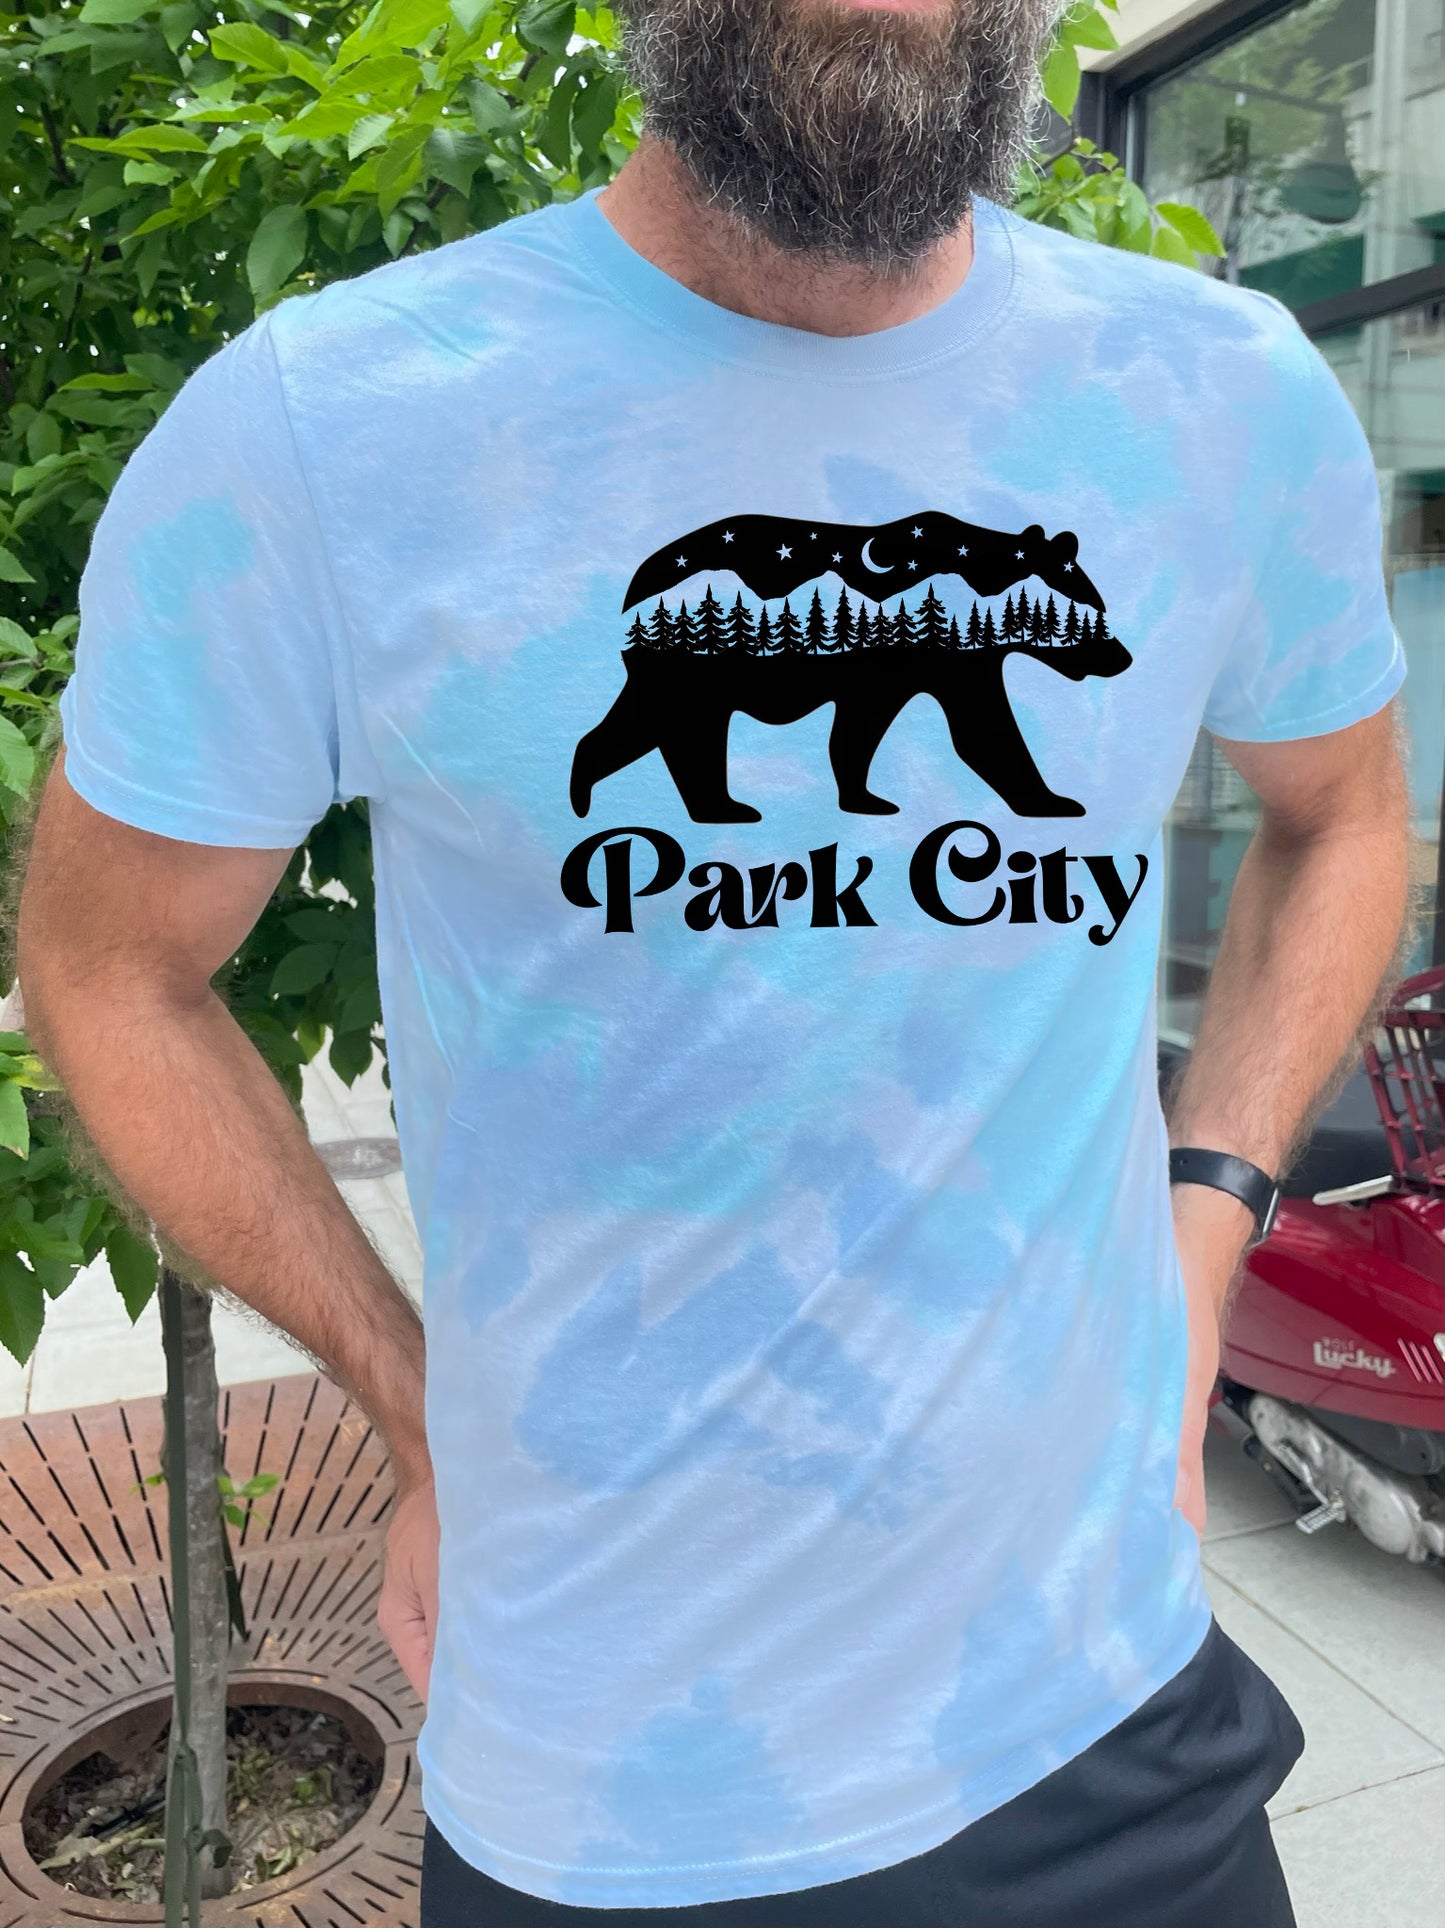 a man with a beard wearing a shirt that says park city